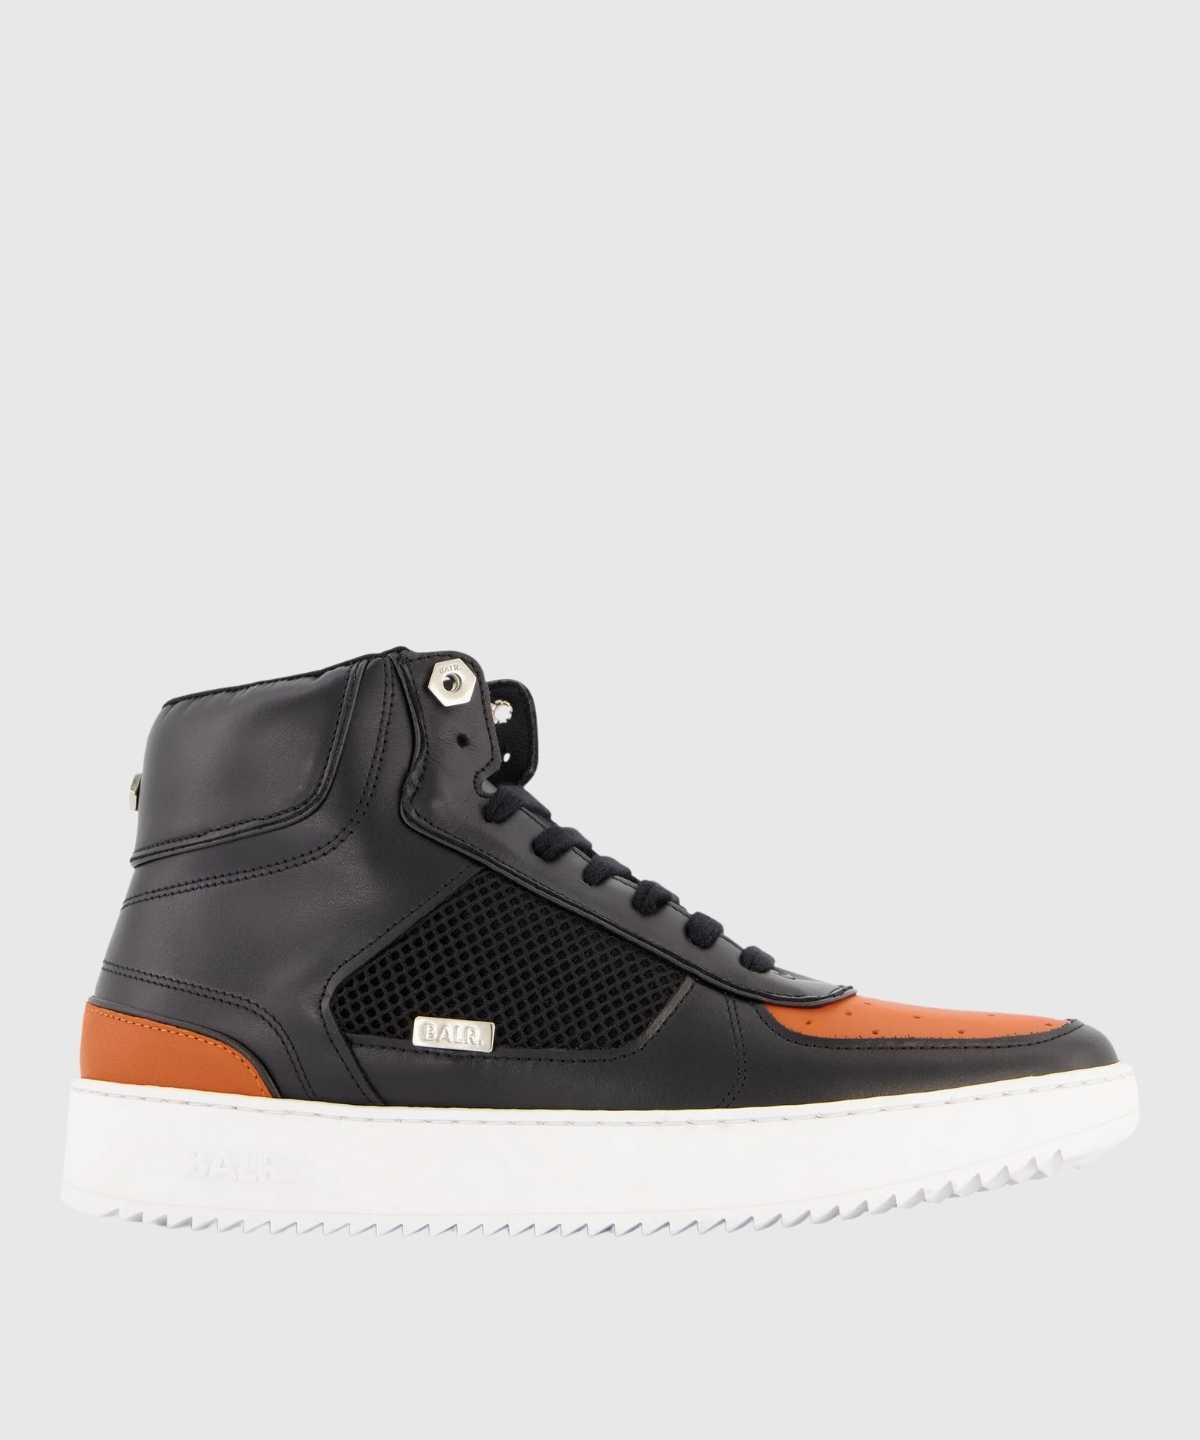 B10.1 Trainer Mid Leather